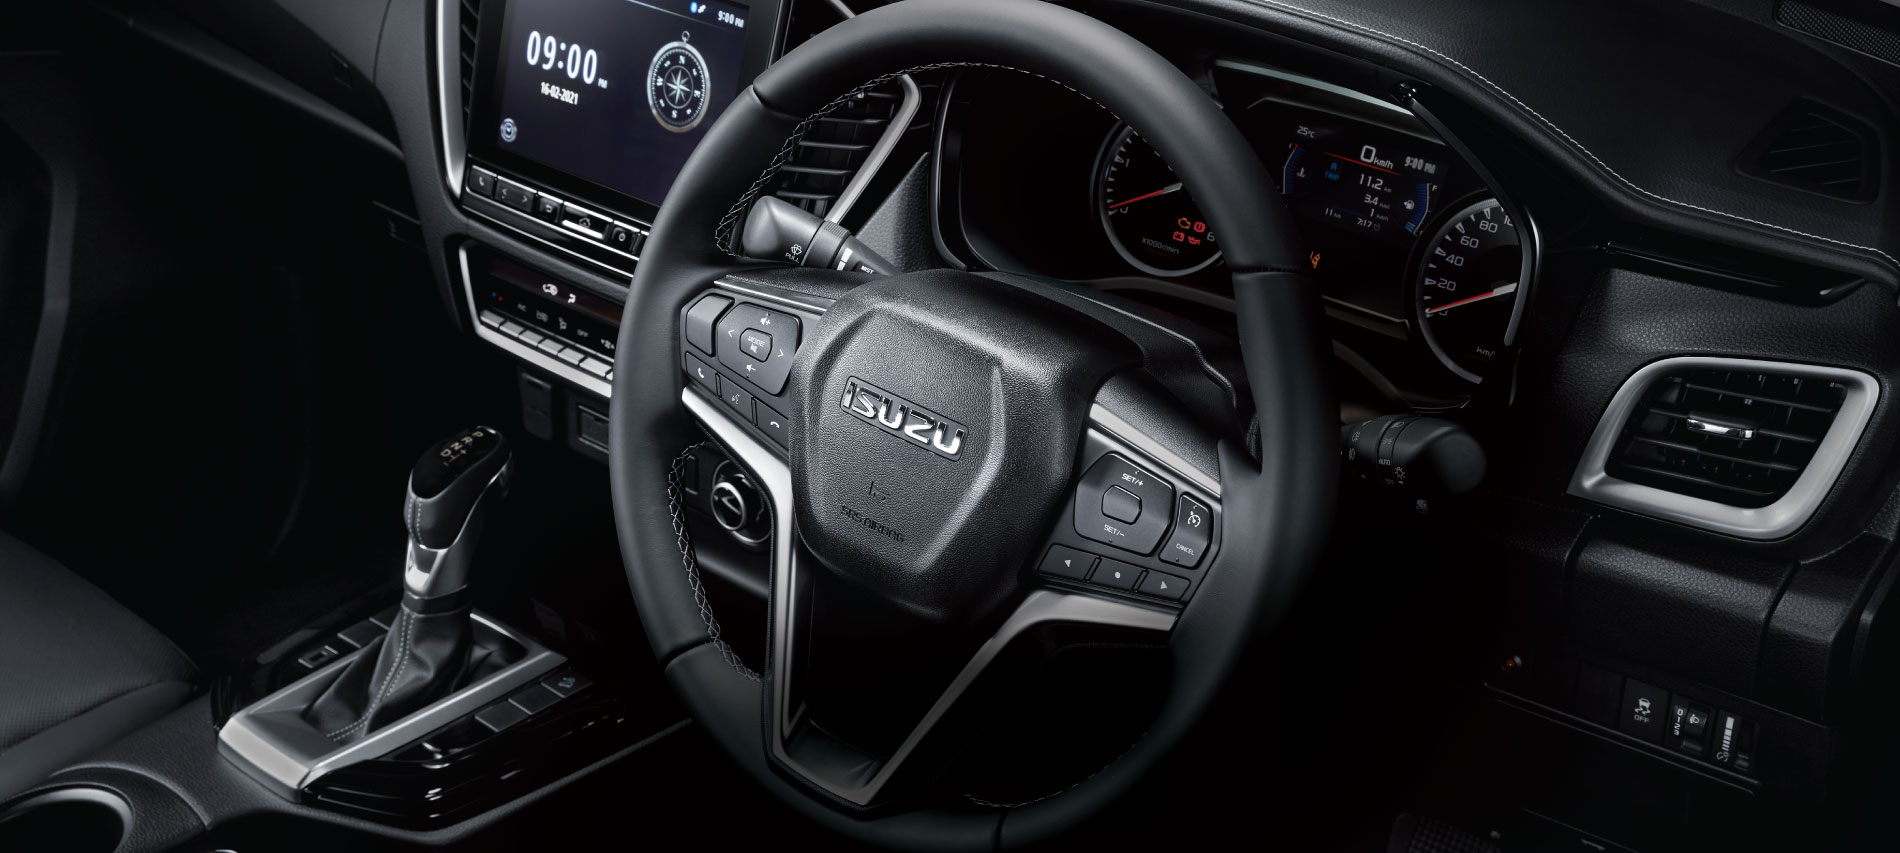 LEATHER STEERING WHEEL WITH AUDIO, BLUETOOTH HANDS-FREE & VOICE RECOGNITION SWITCHES